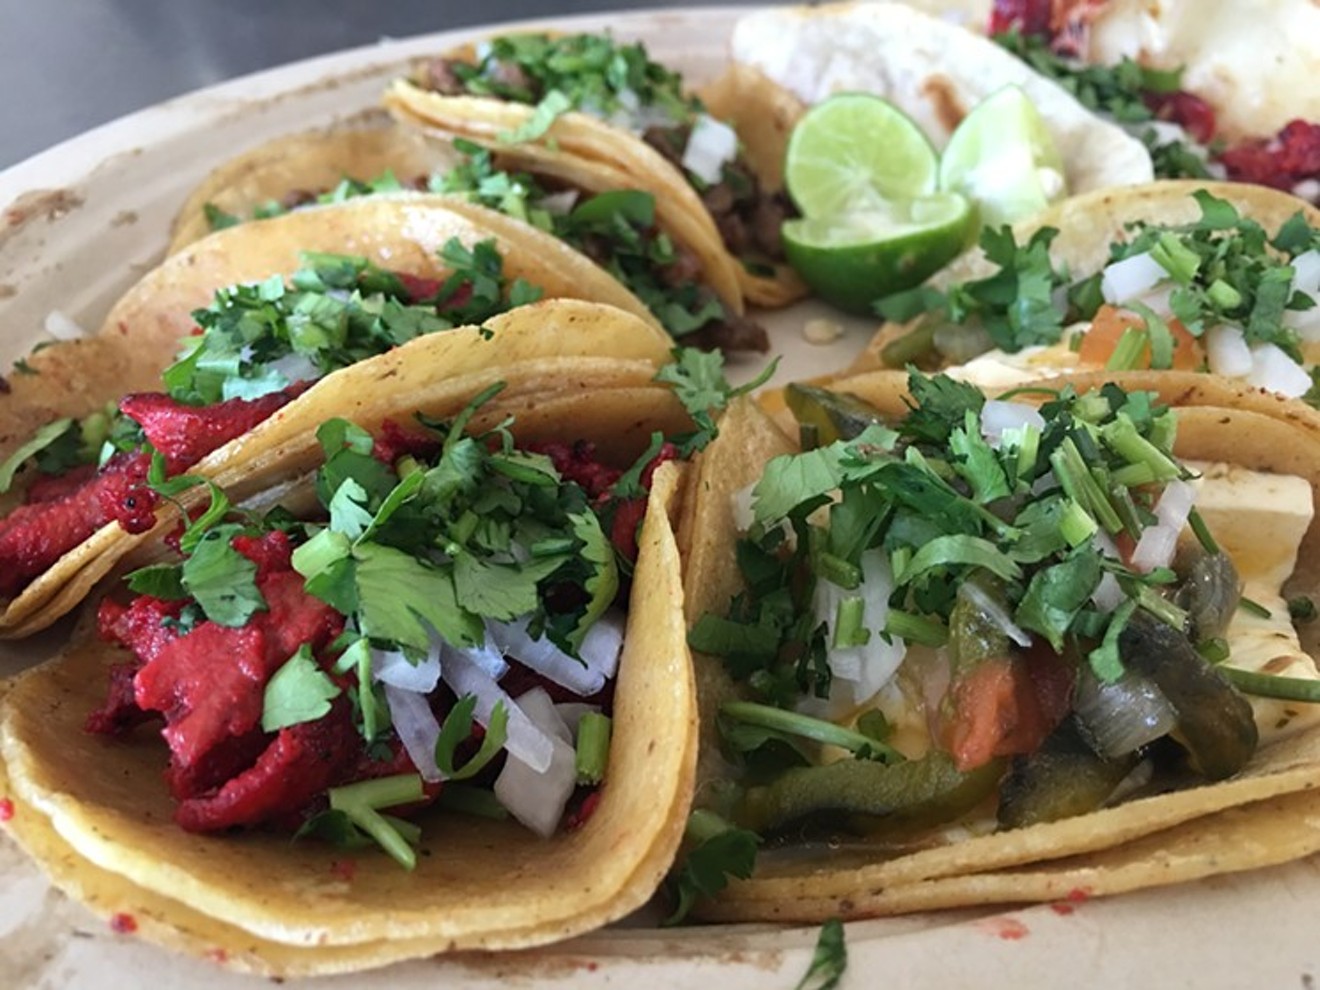 This beginner-friendly taco crawl is perfect for Dallas visitors and lifers alike. Trompo, pictured here, is a must.